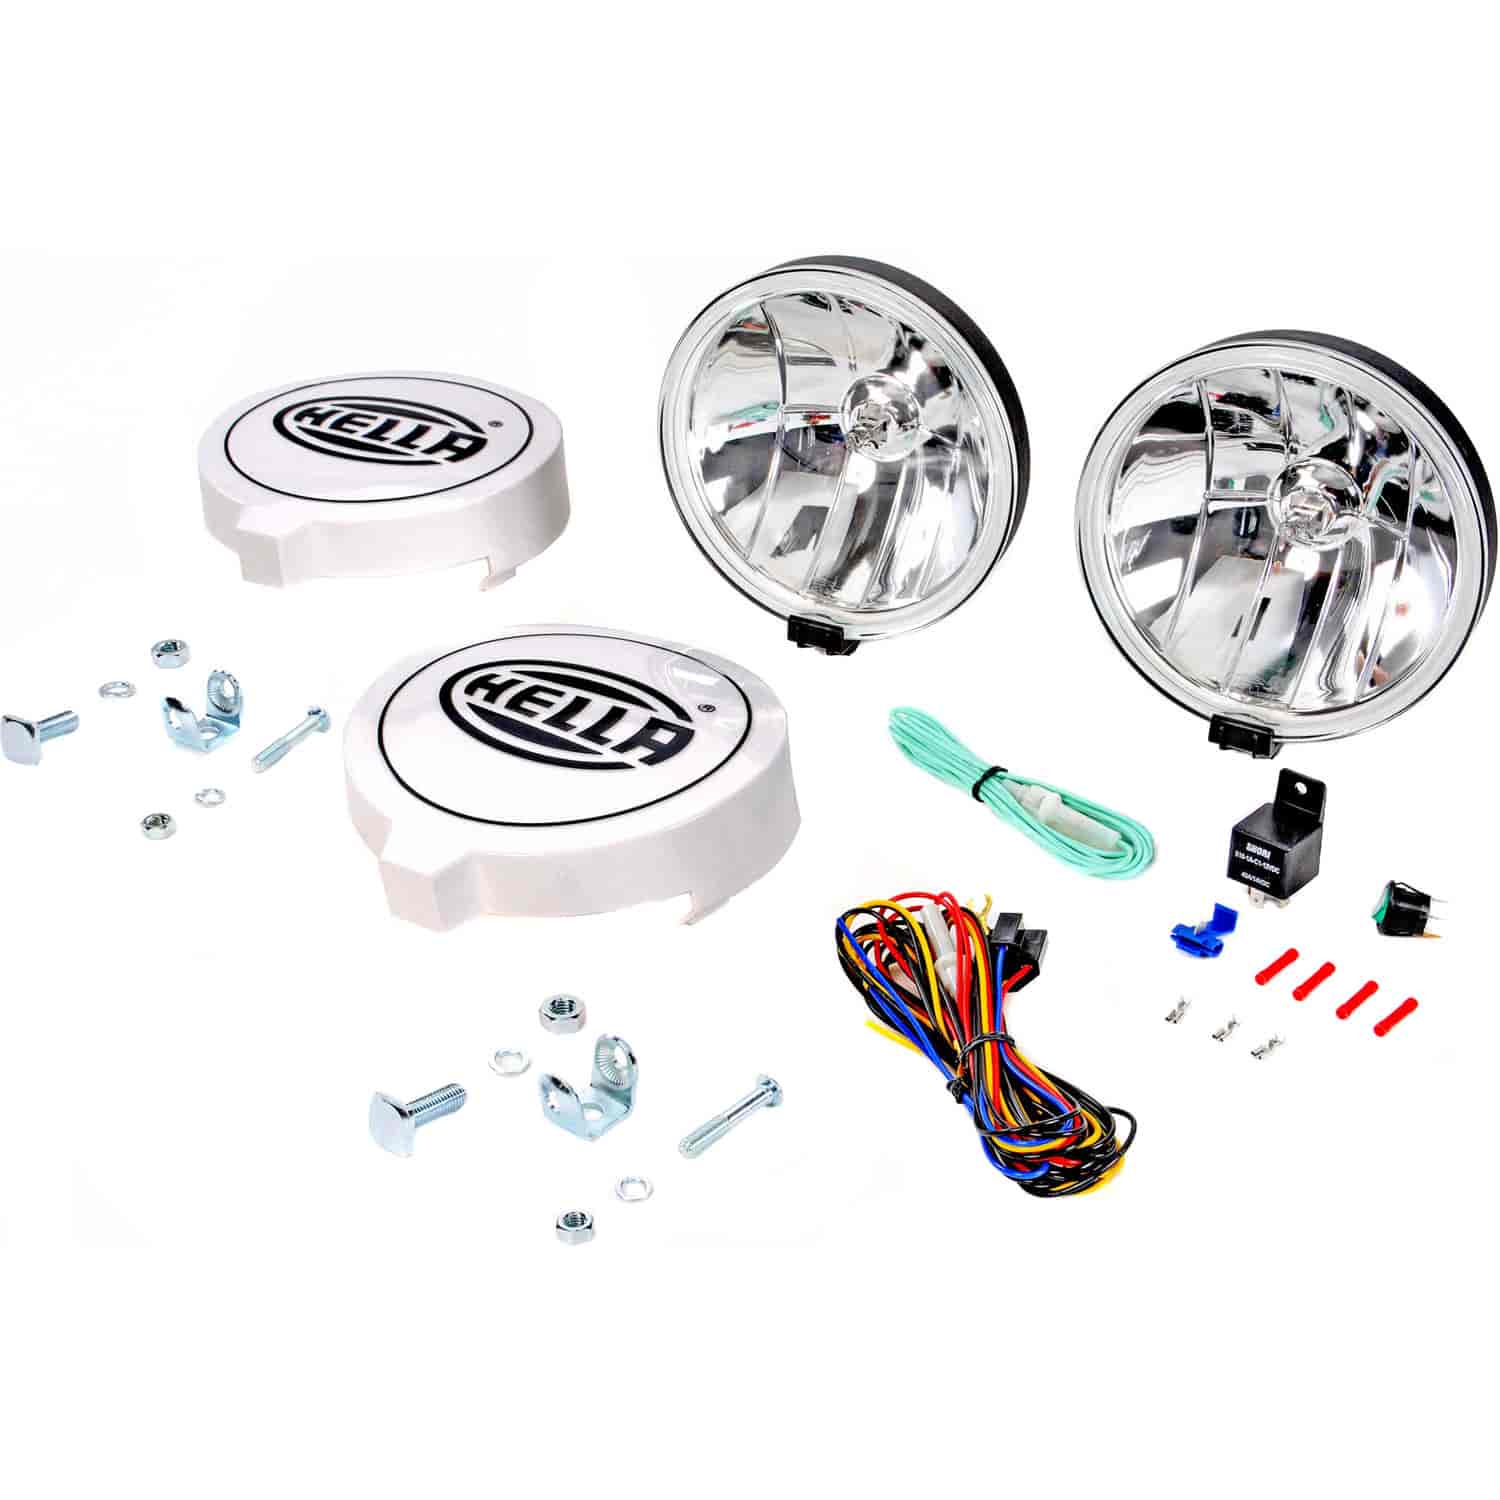 700FF Driving Light Kit Includes 2 Halogen Driving